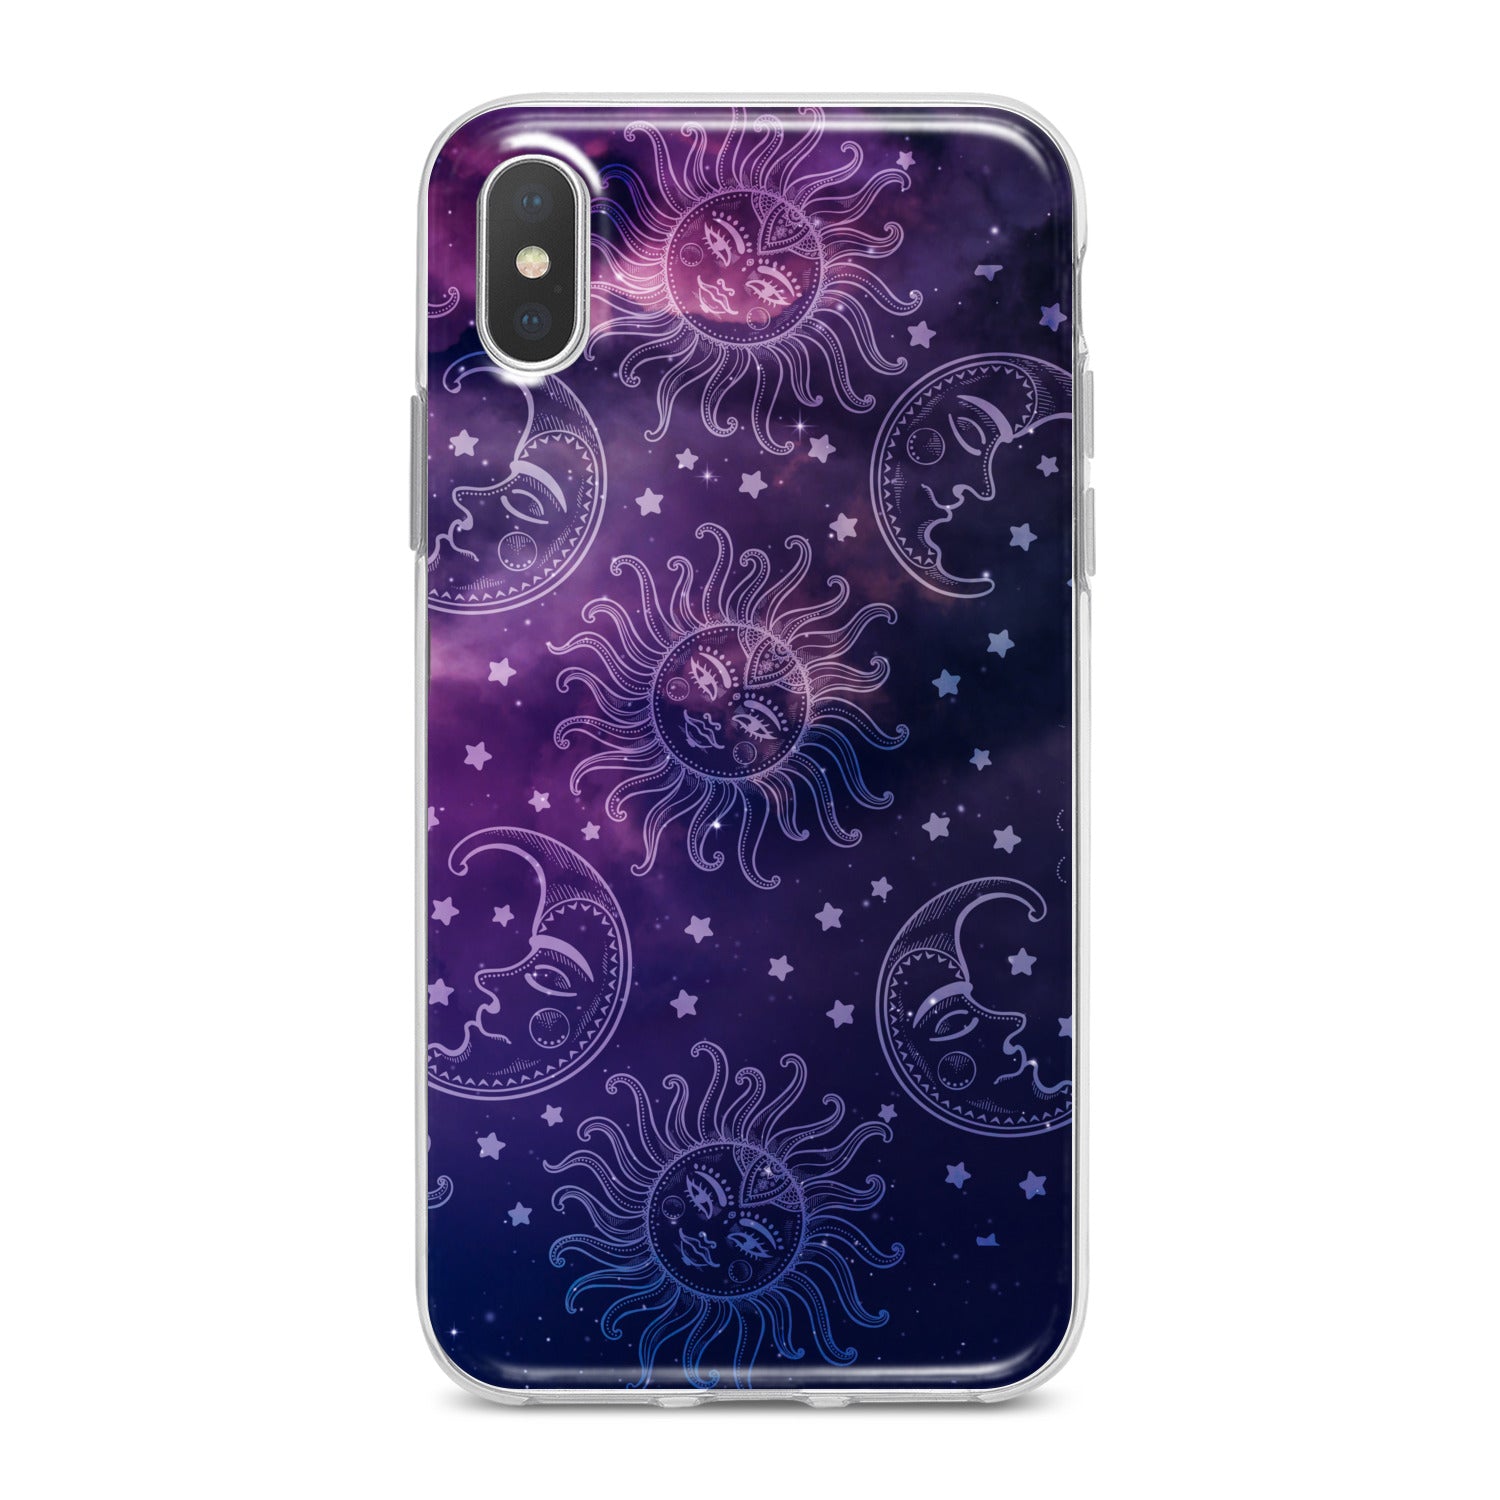 Lex Altern Celestial Beauty Phone Case for your iPhone & Android phone.